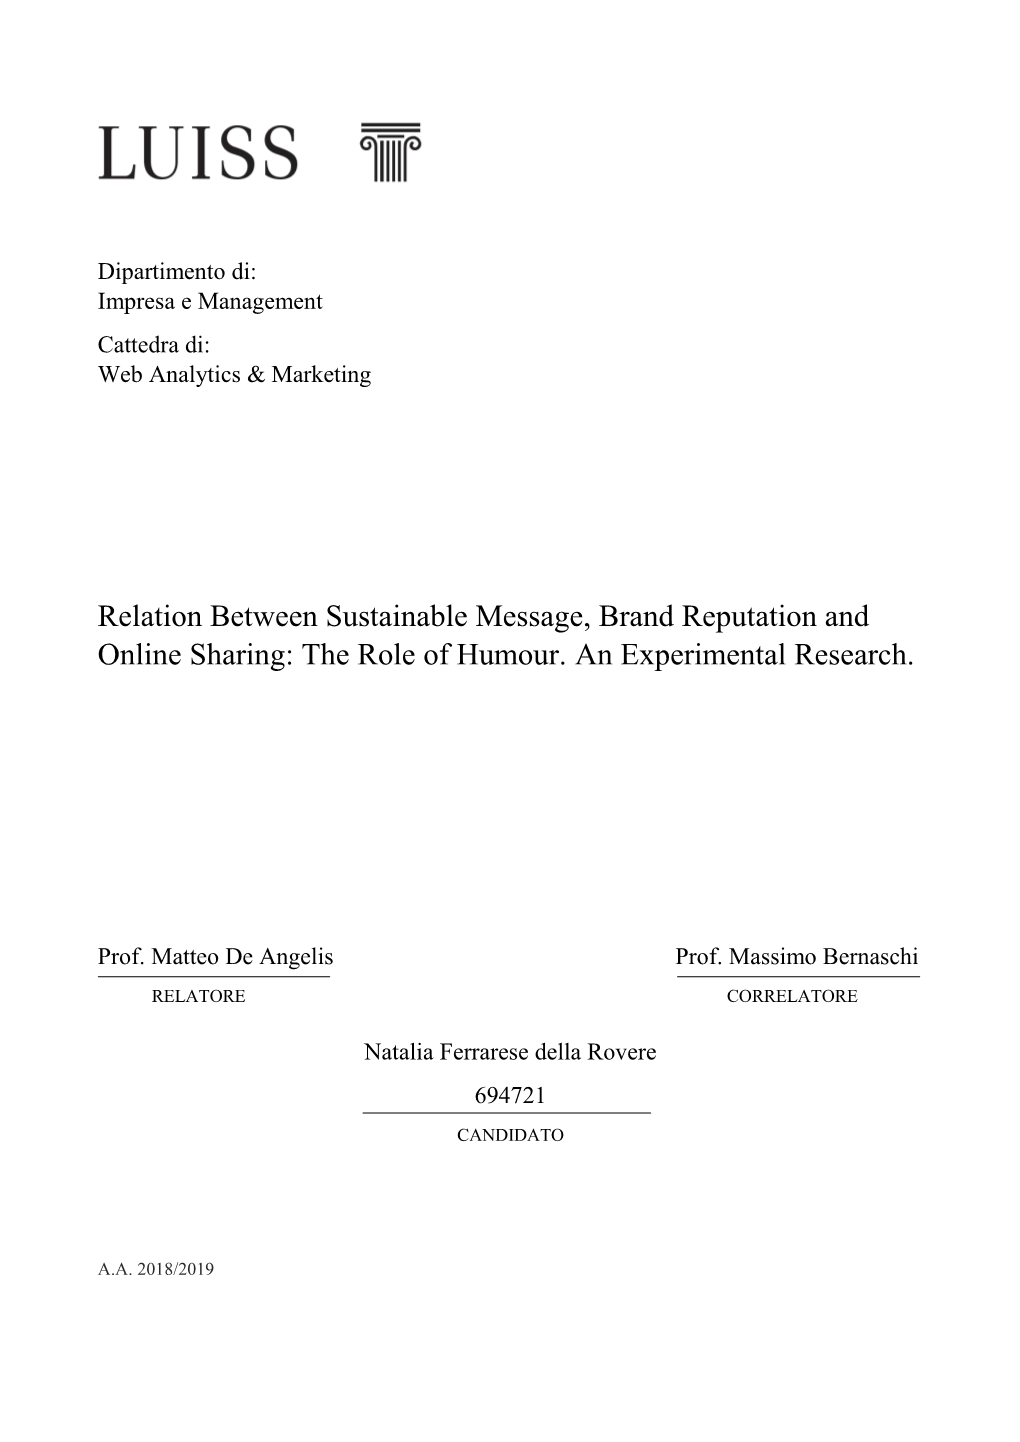 Relation Between Sustainable Message, Brand Reputation and Online Sharing: the Role of Humour